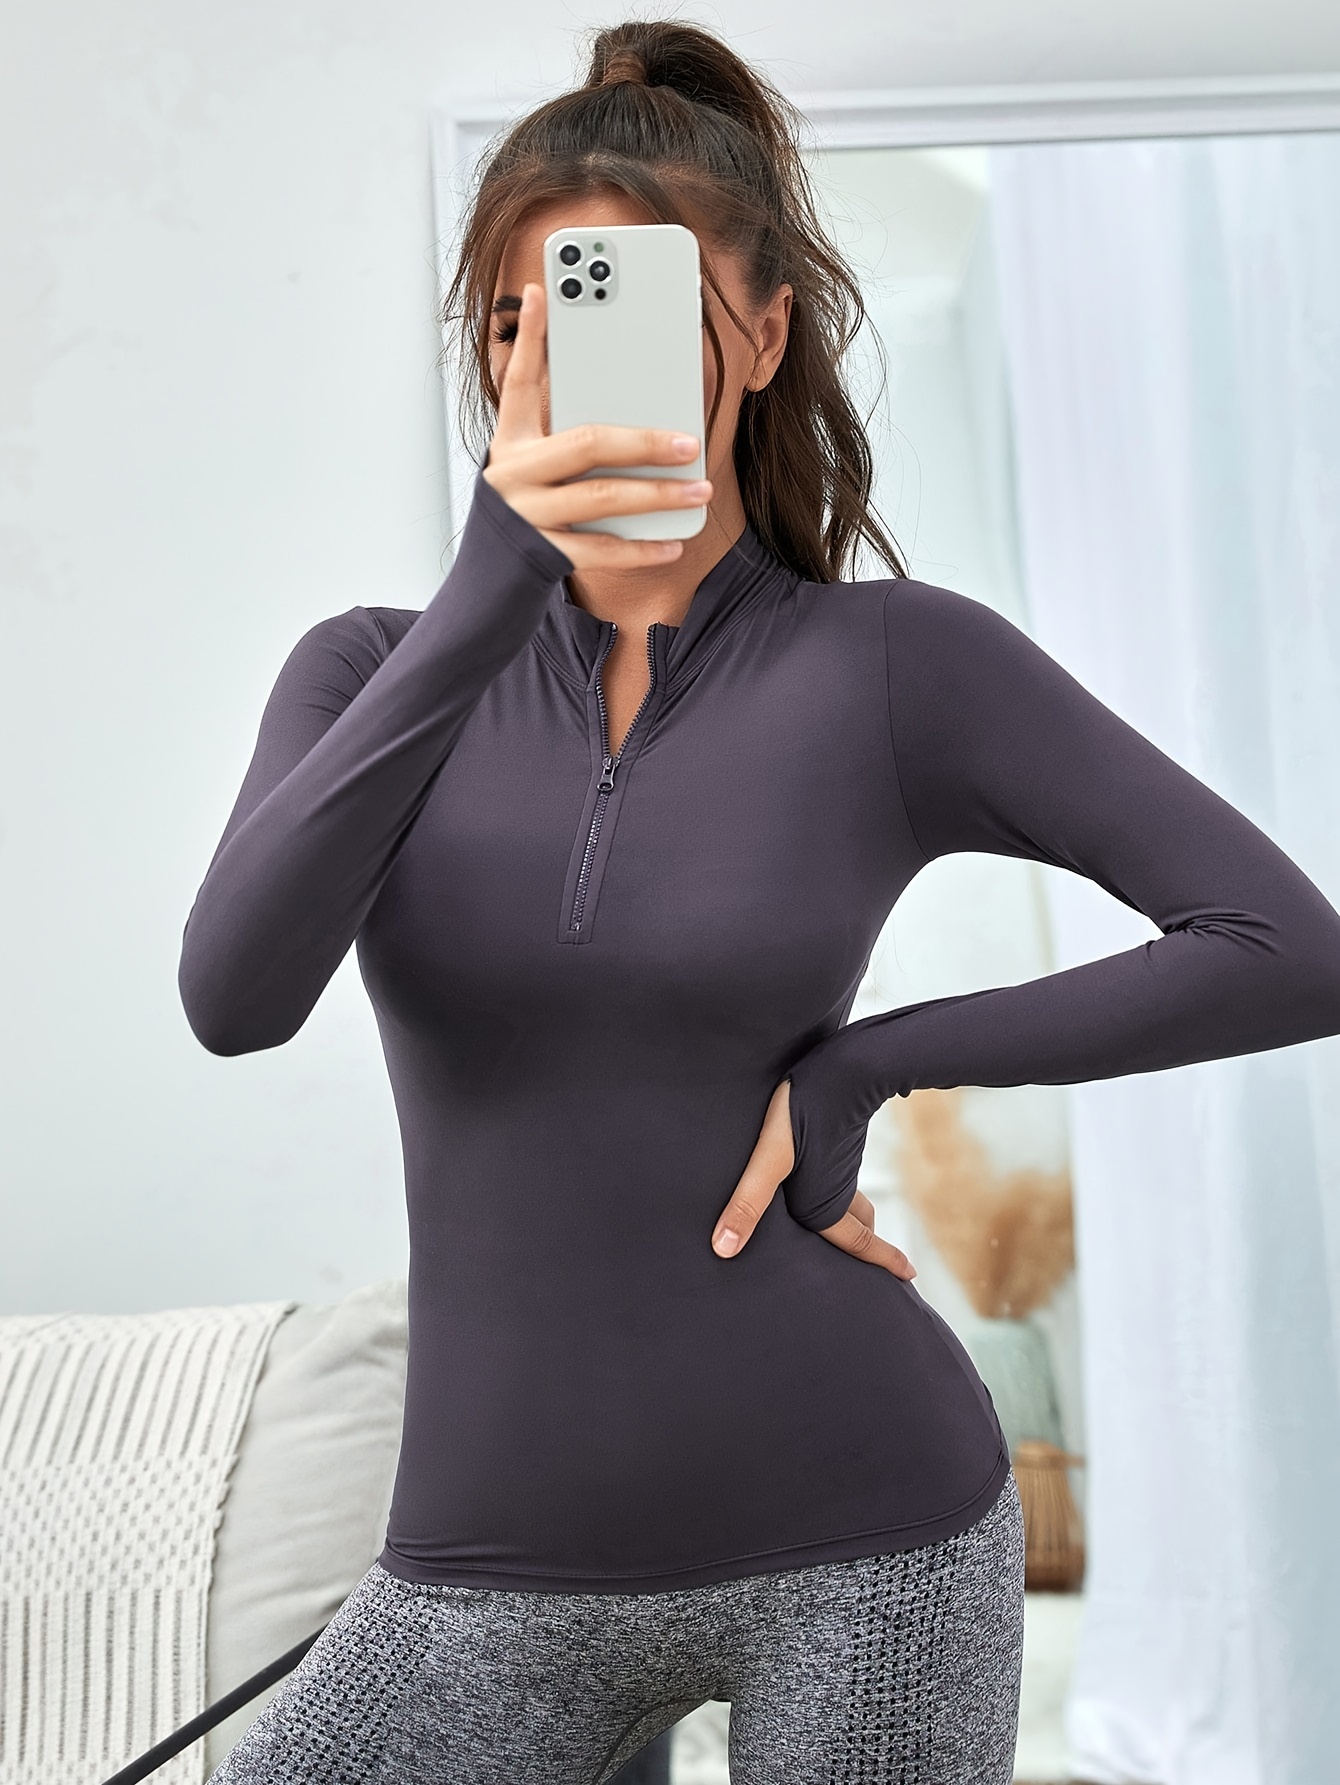 Women's Long Sleeve Sports Pullover, Best Yoga, Sports, Workout